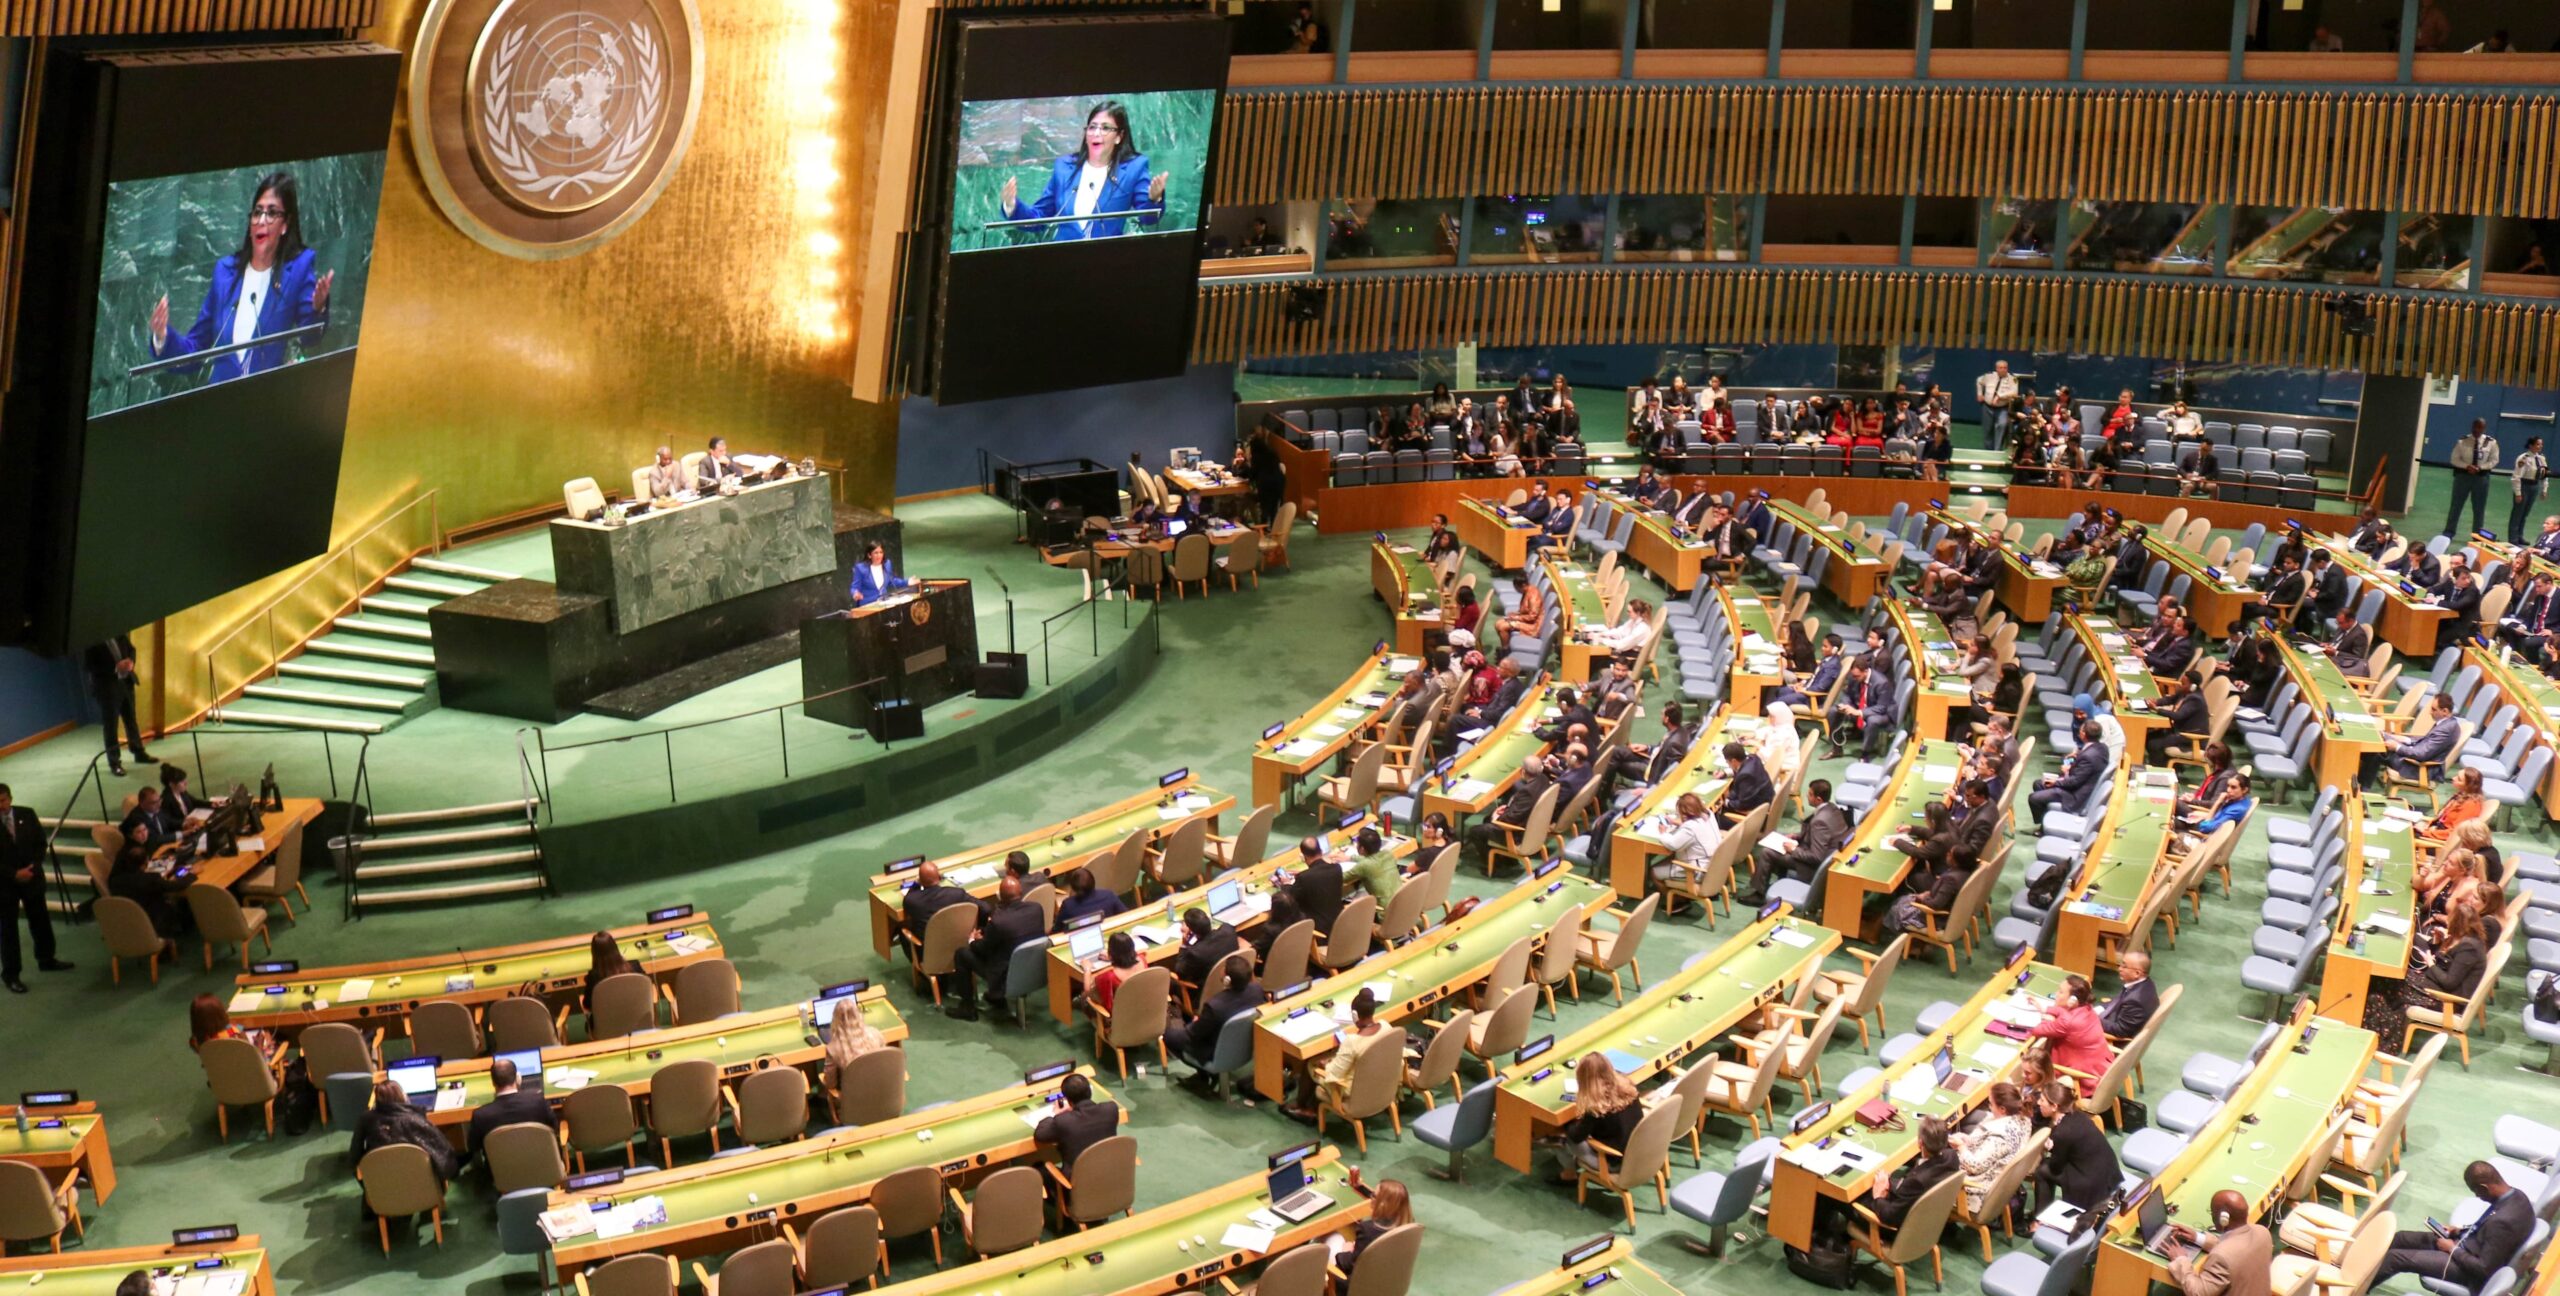 Statement by Vice-president Delcy Rodríguez at the 74th Session of the United Nations General Assembly